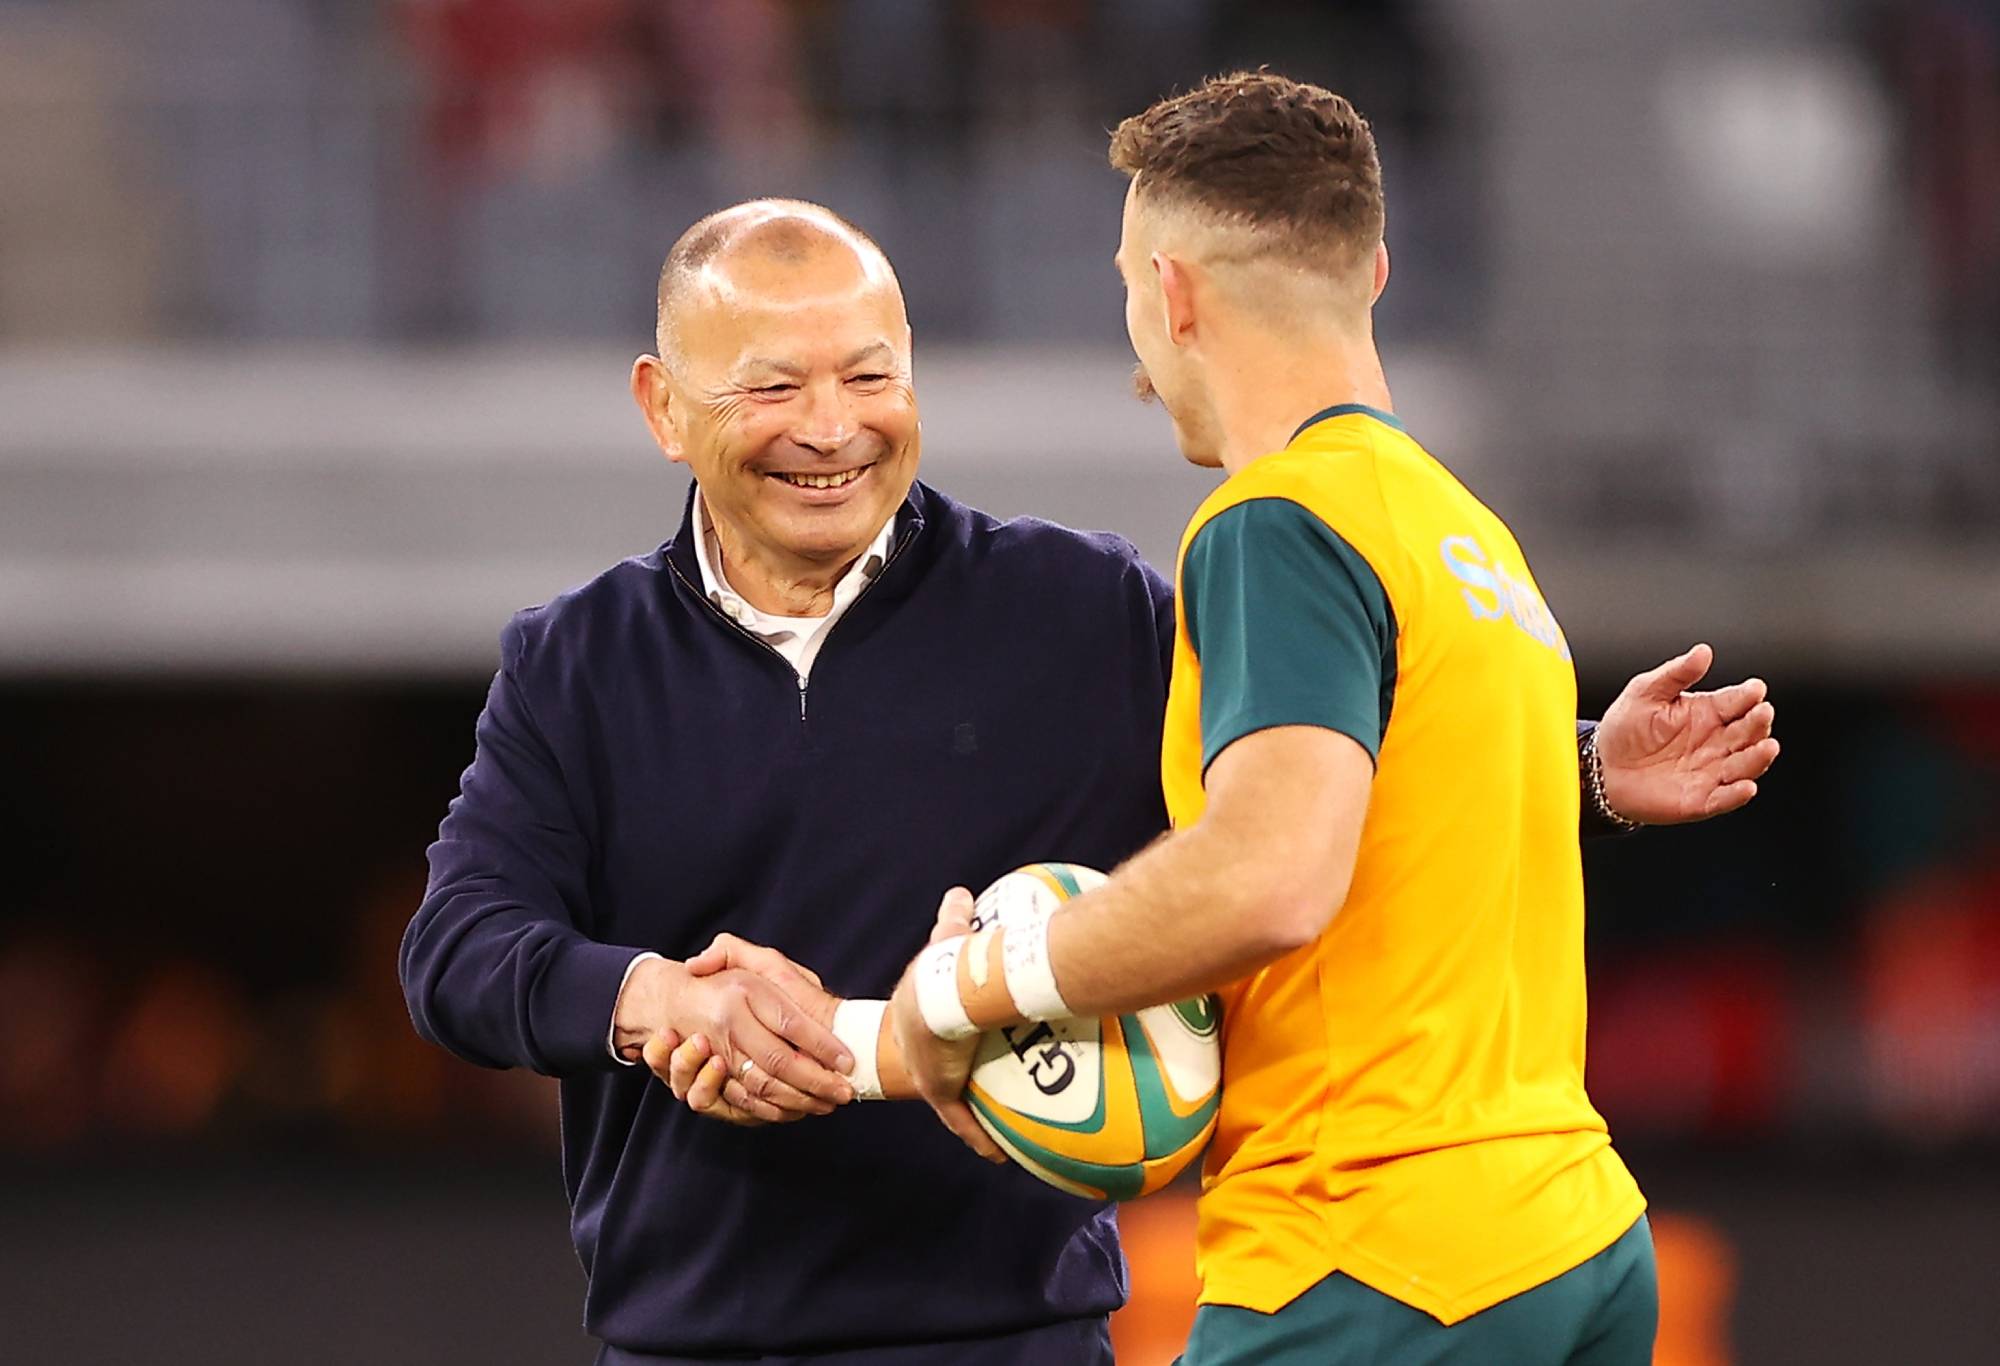 PERTH, AUSTRALIA - JULY 02: England coach Eddie Jones shakes hands with Nic White of the Wallabies during the warm-up before one of the international test match series between the Australian Wallabies and England at Optus Stadium on July 02, 2022 in Perth, Australia.  (Photo: Mark Kolbe/Getty Images)